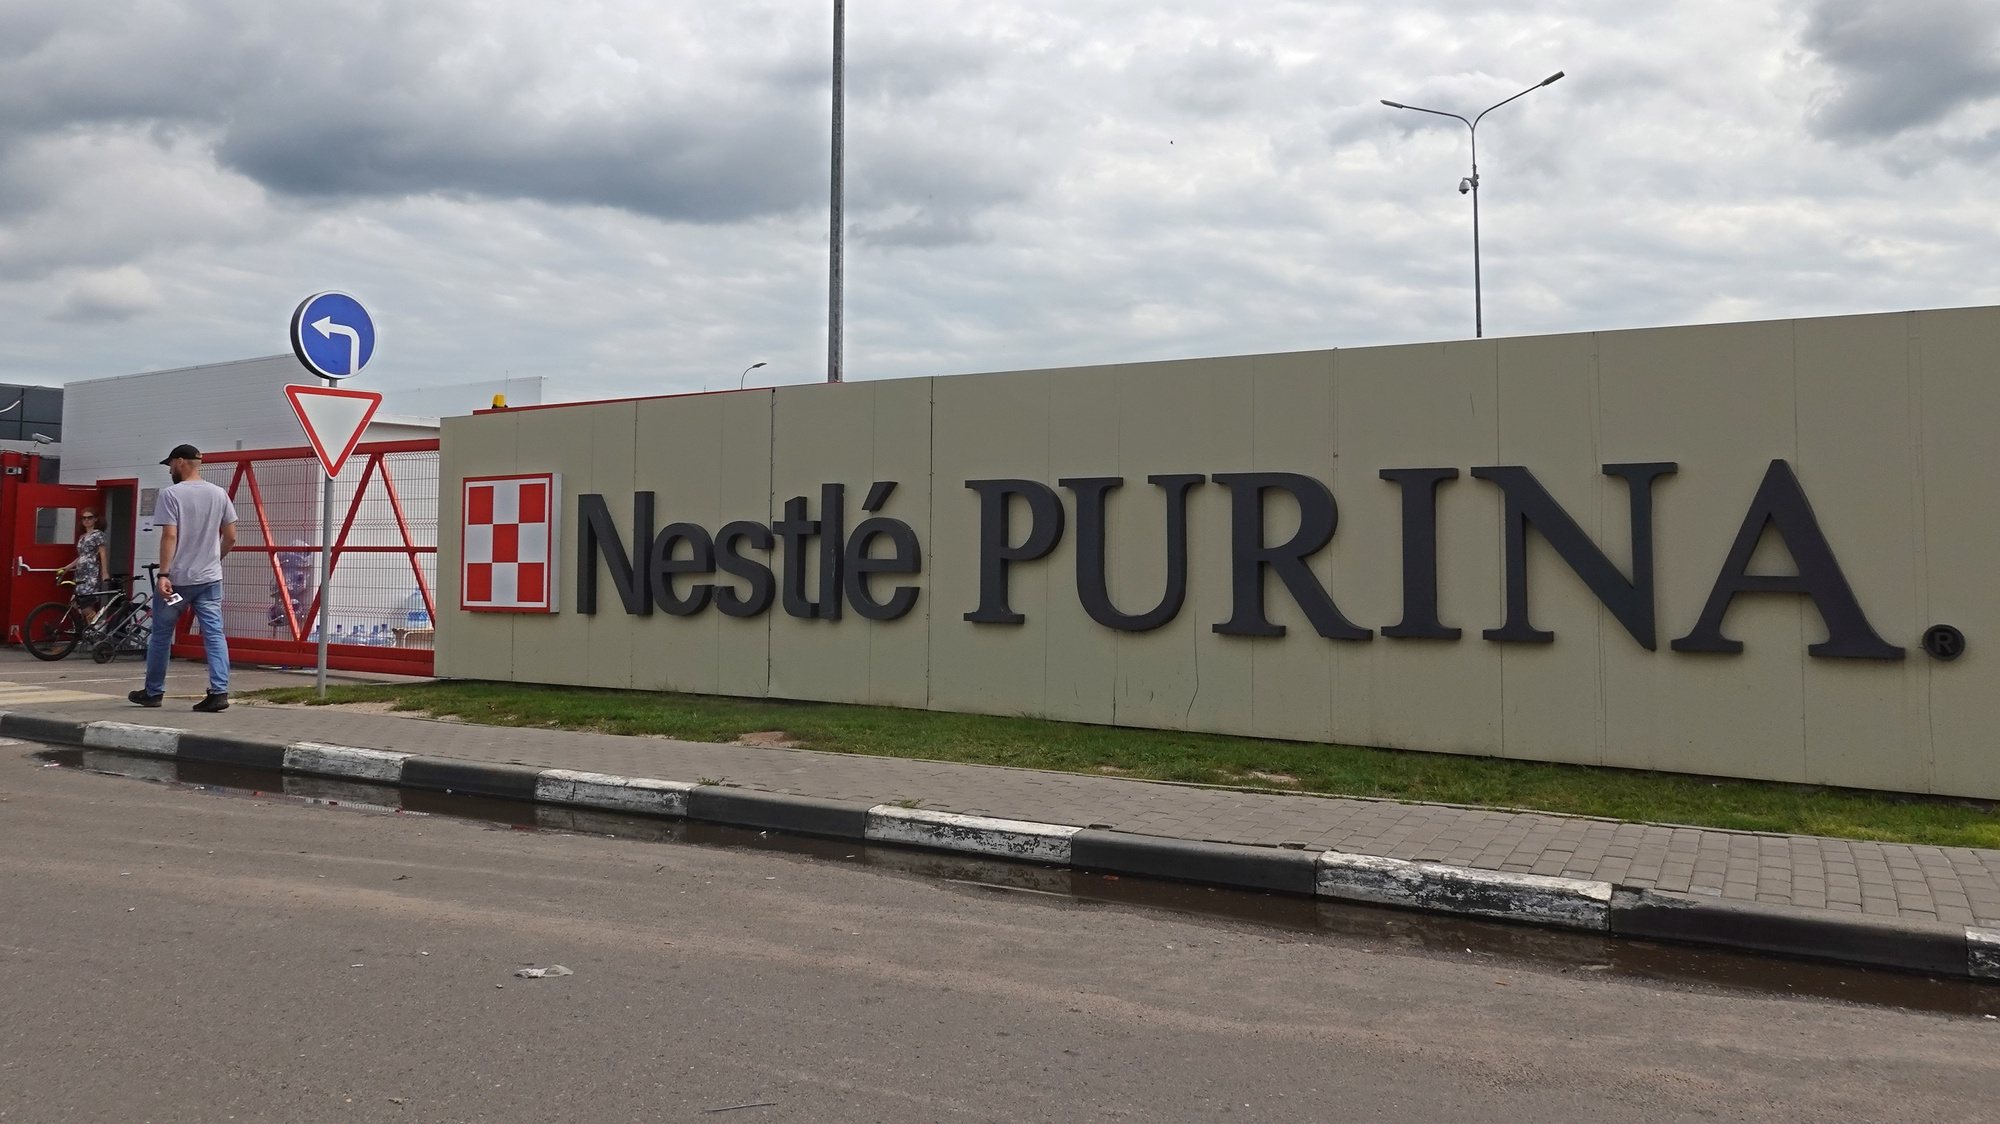 epa10114169 A man walks by a pet food factory of Nestle Purina PetCare in Vorsino, Kaluga region, Russia, 10 August 2022. The pet food factory of Nestle Purina PetCare in Vorsino was launched in 2007 and has more than 20 modern lines for the production and packaging of dry and wet food for cats and dogs. The factory&#039;s products are exported to 14 countries. According to some media reports, Purina has suspended the production and sale of some types of pet food in Russia due to difficulties in purchasing and delivery of raw materials. Russian troops entered Ukraine on 24 February 2022, prompting a series of severe economic sanctions imposed by Western countries on Russia.  EPA/MAXIM SHIPENKOV